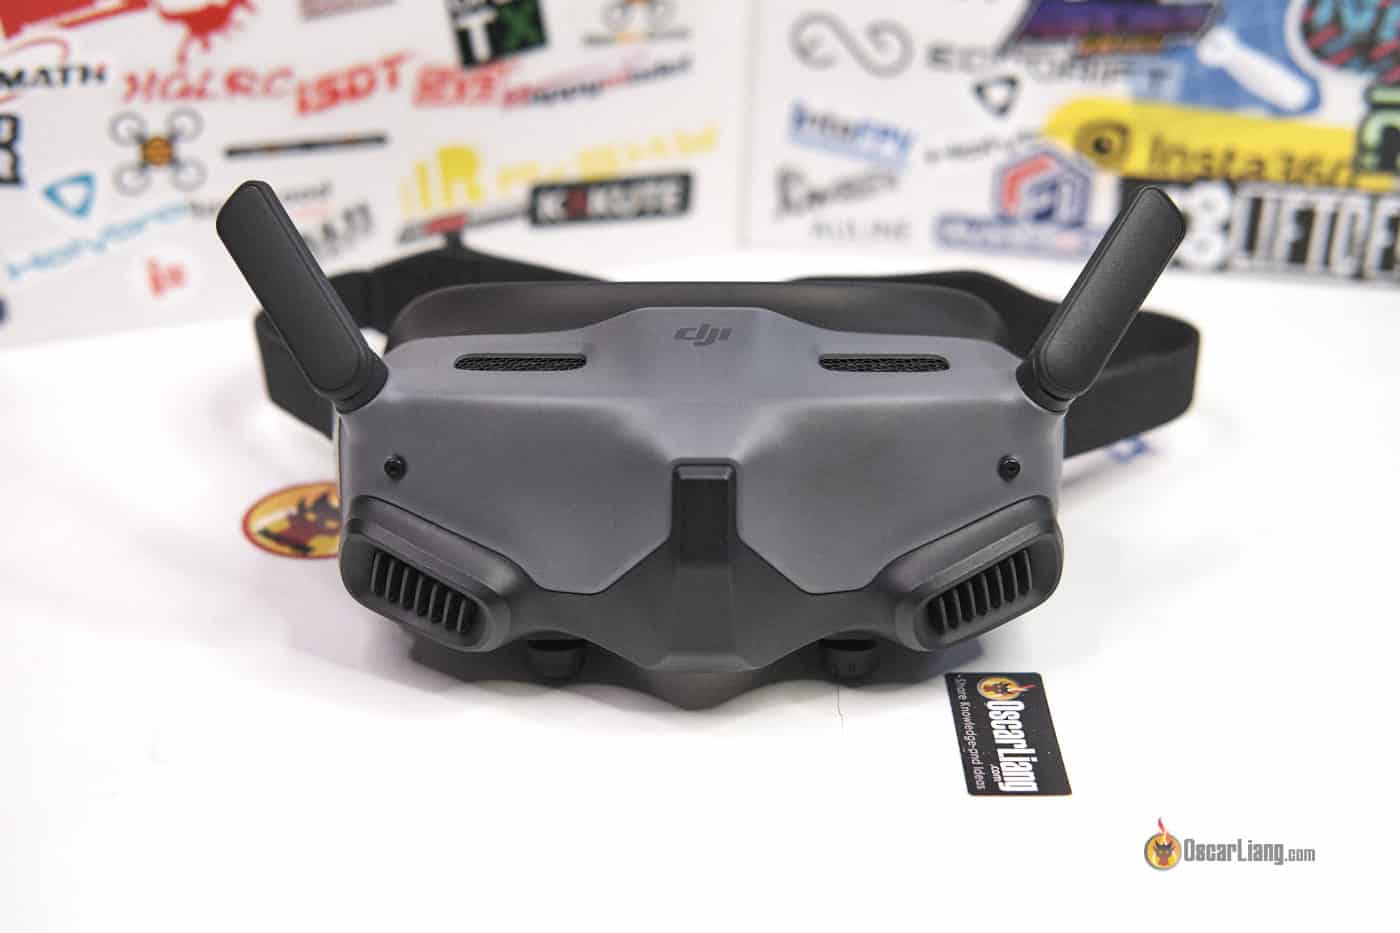 DJI Avata drone adds support to use goggles with O3 Air Unit